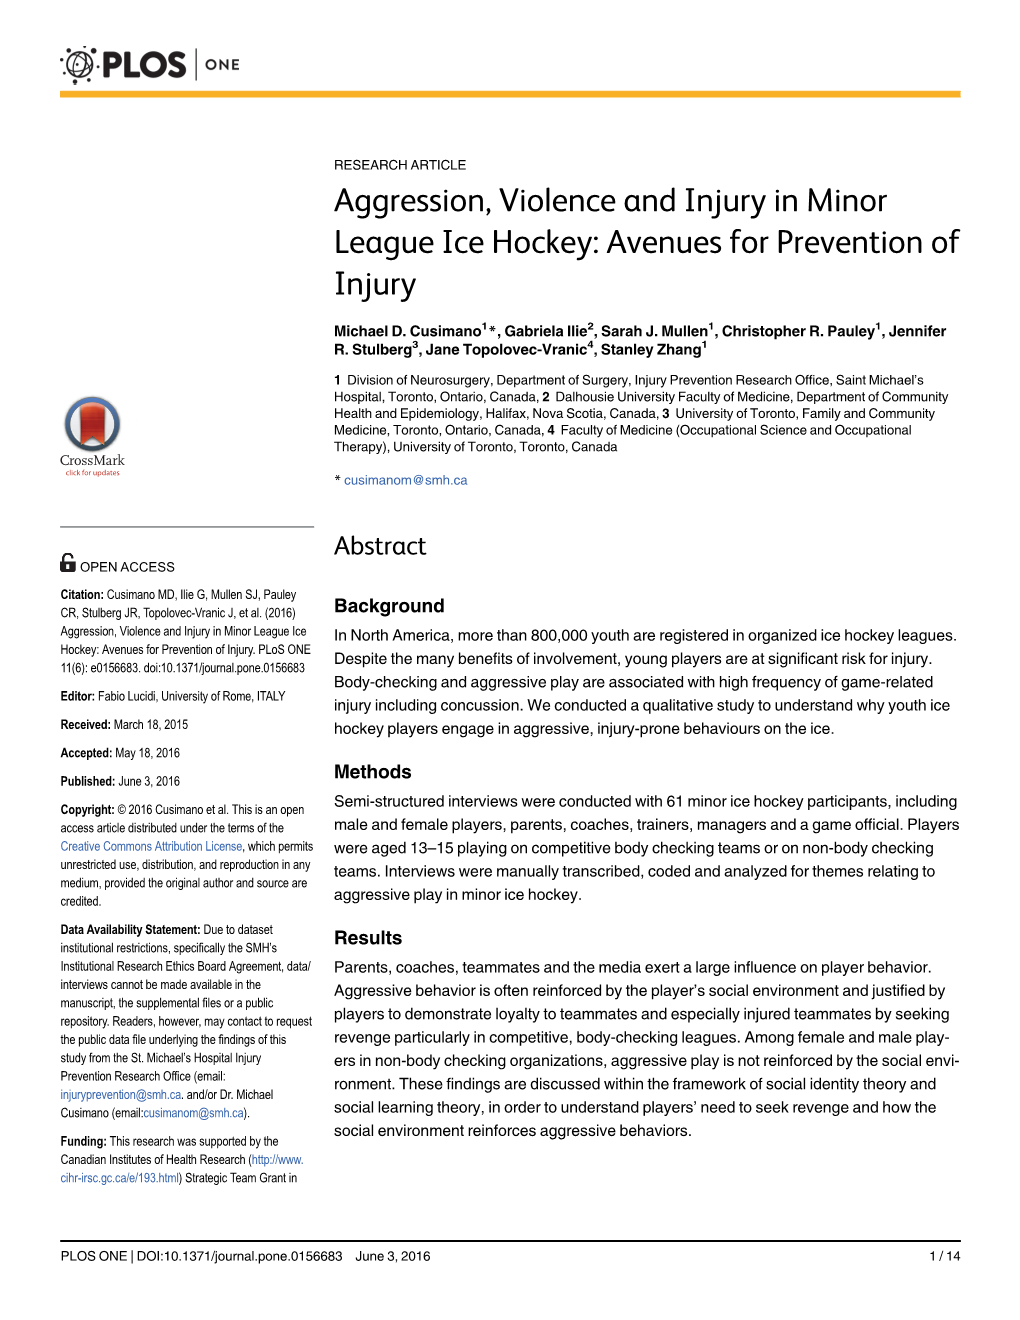 Aggression, Violence and Injury in Minor League Ice Hockey: Avenues for Prevention of Injury